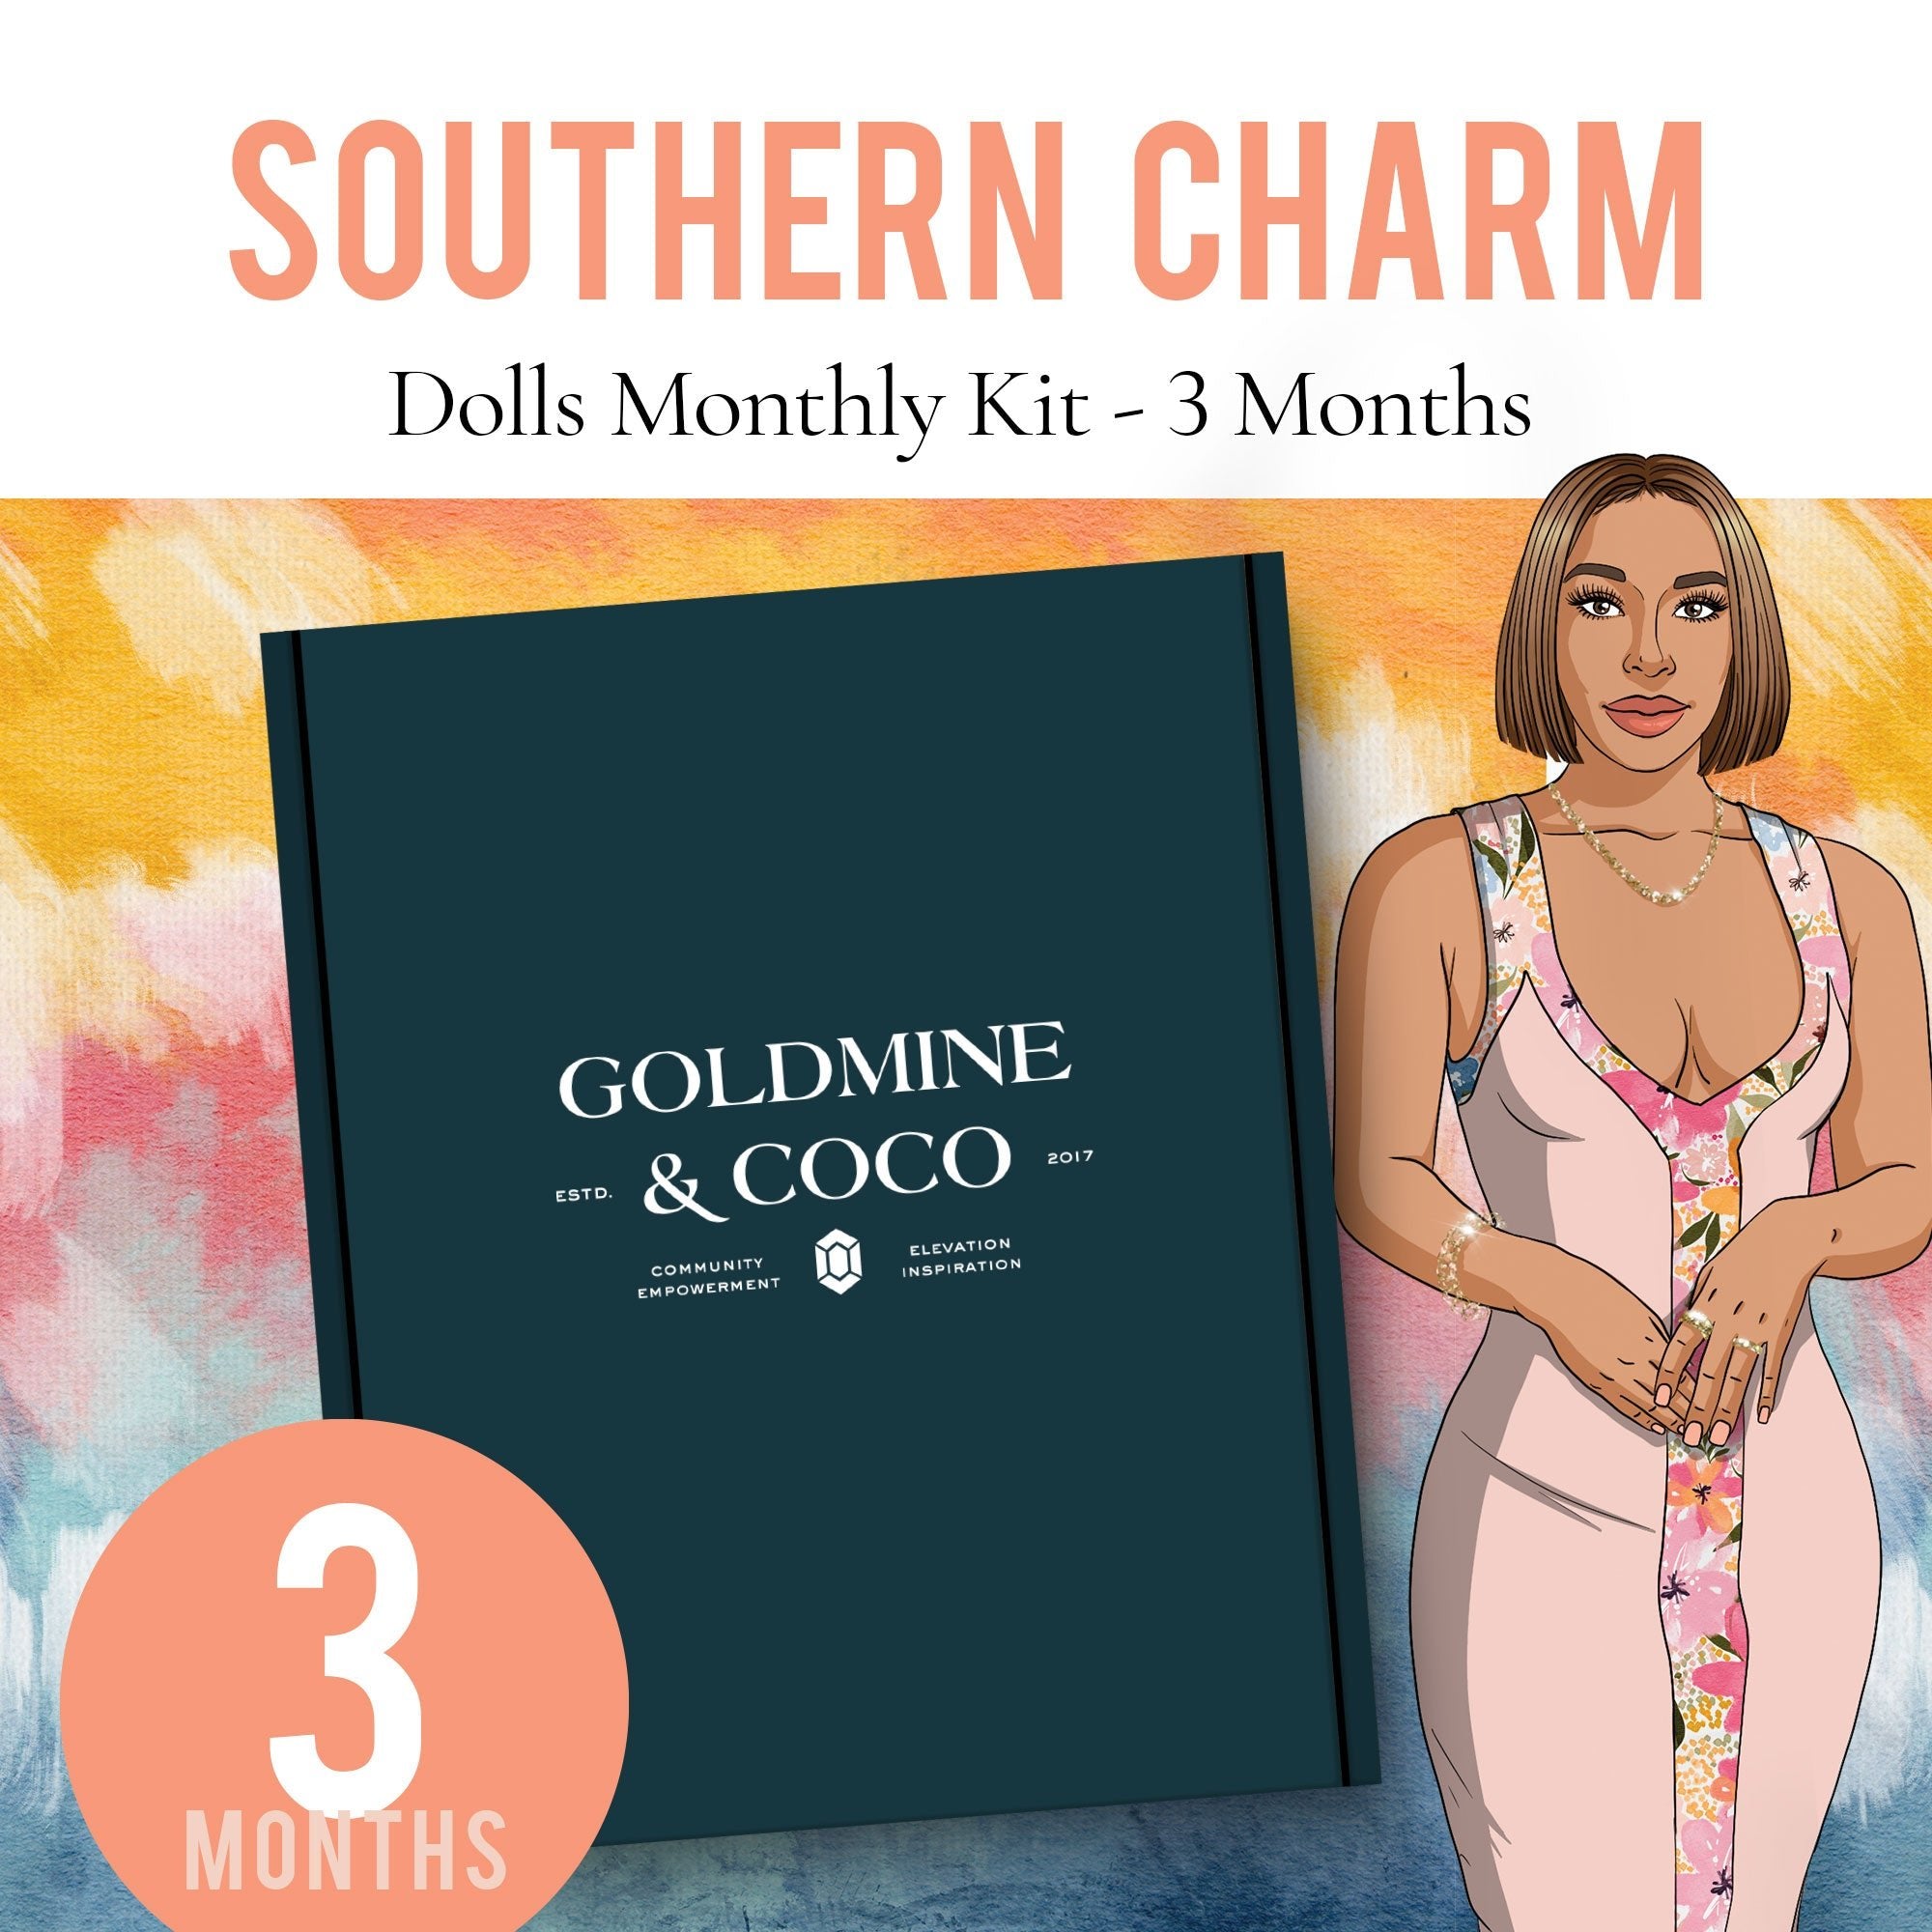 Standard Planning + Journaling: Monthly Subscription Kit | 3 Months - Goldmine & Coco -